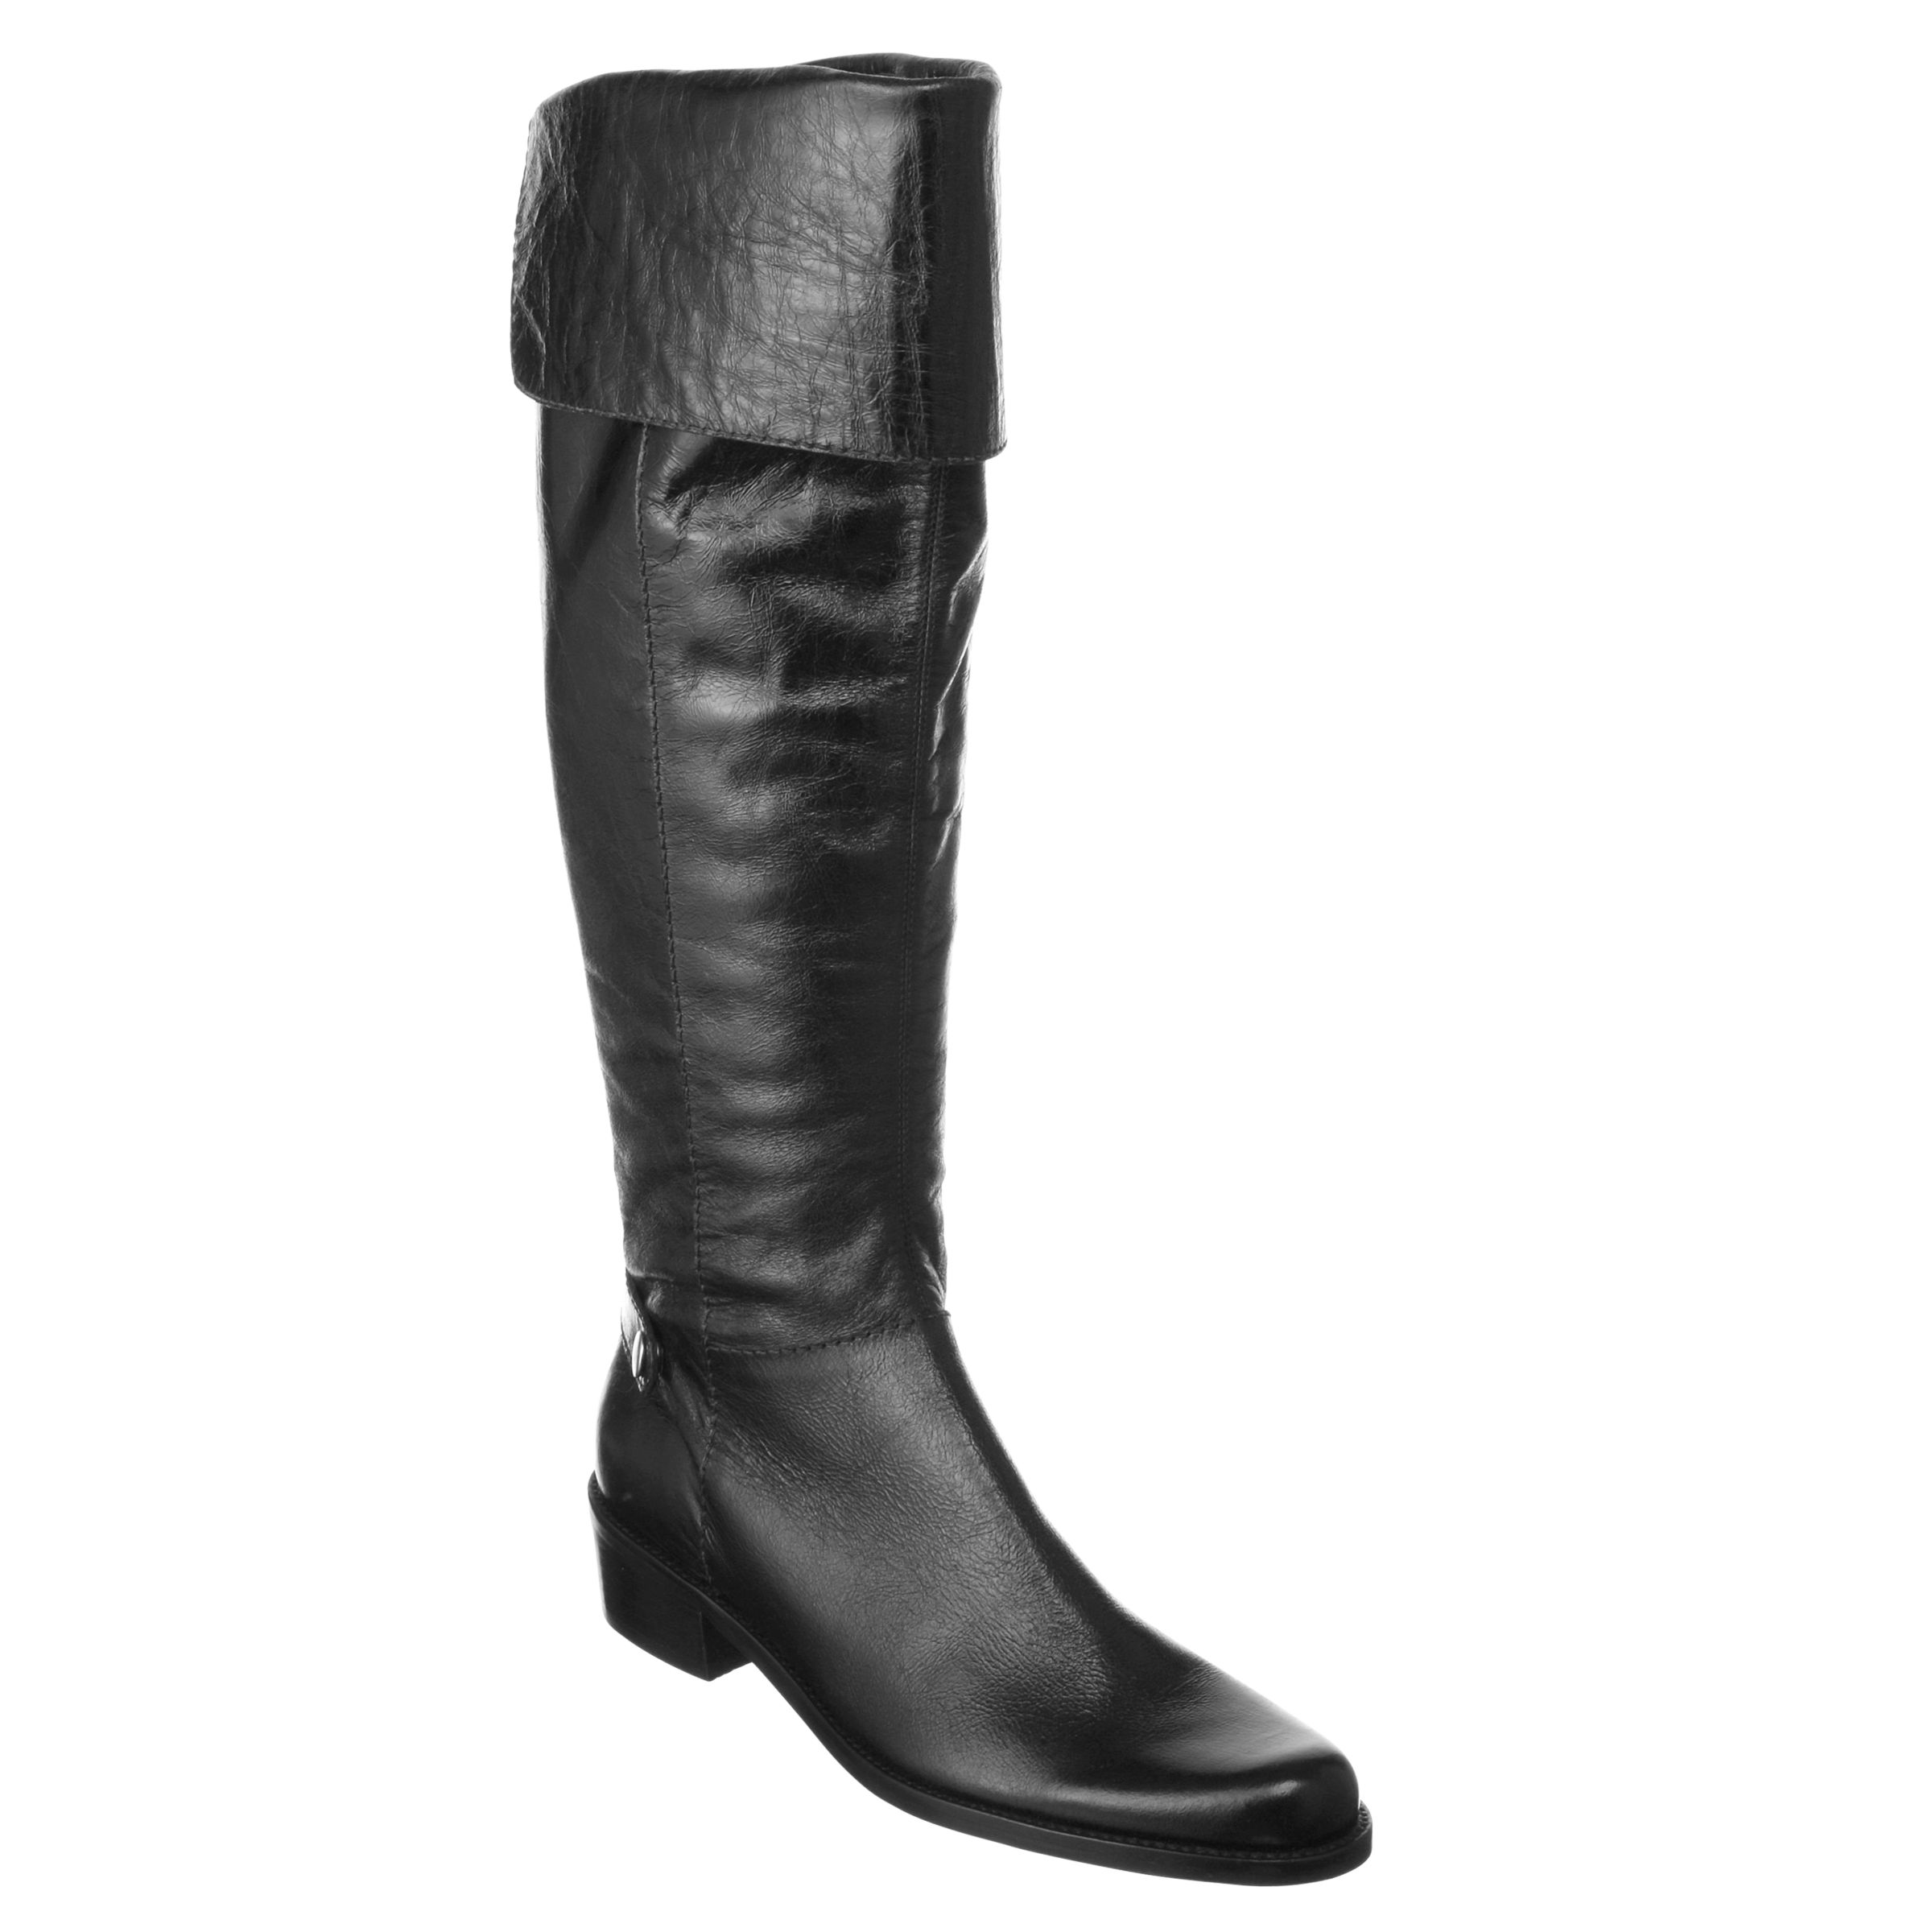 Dune Gully Back Zip Riding Over The Knee Boots, Black at John Lewis